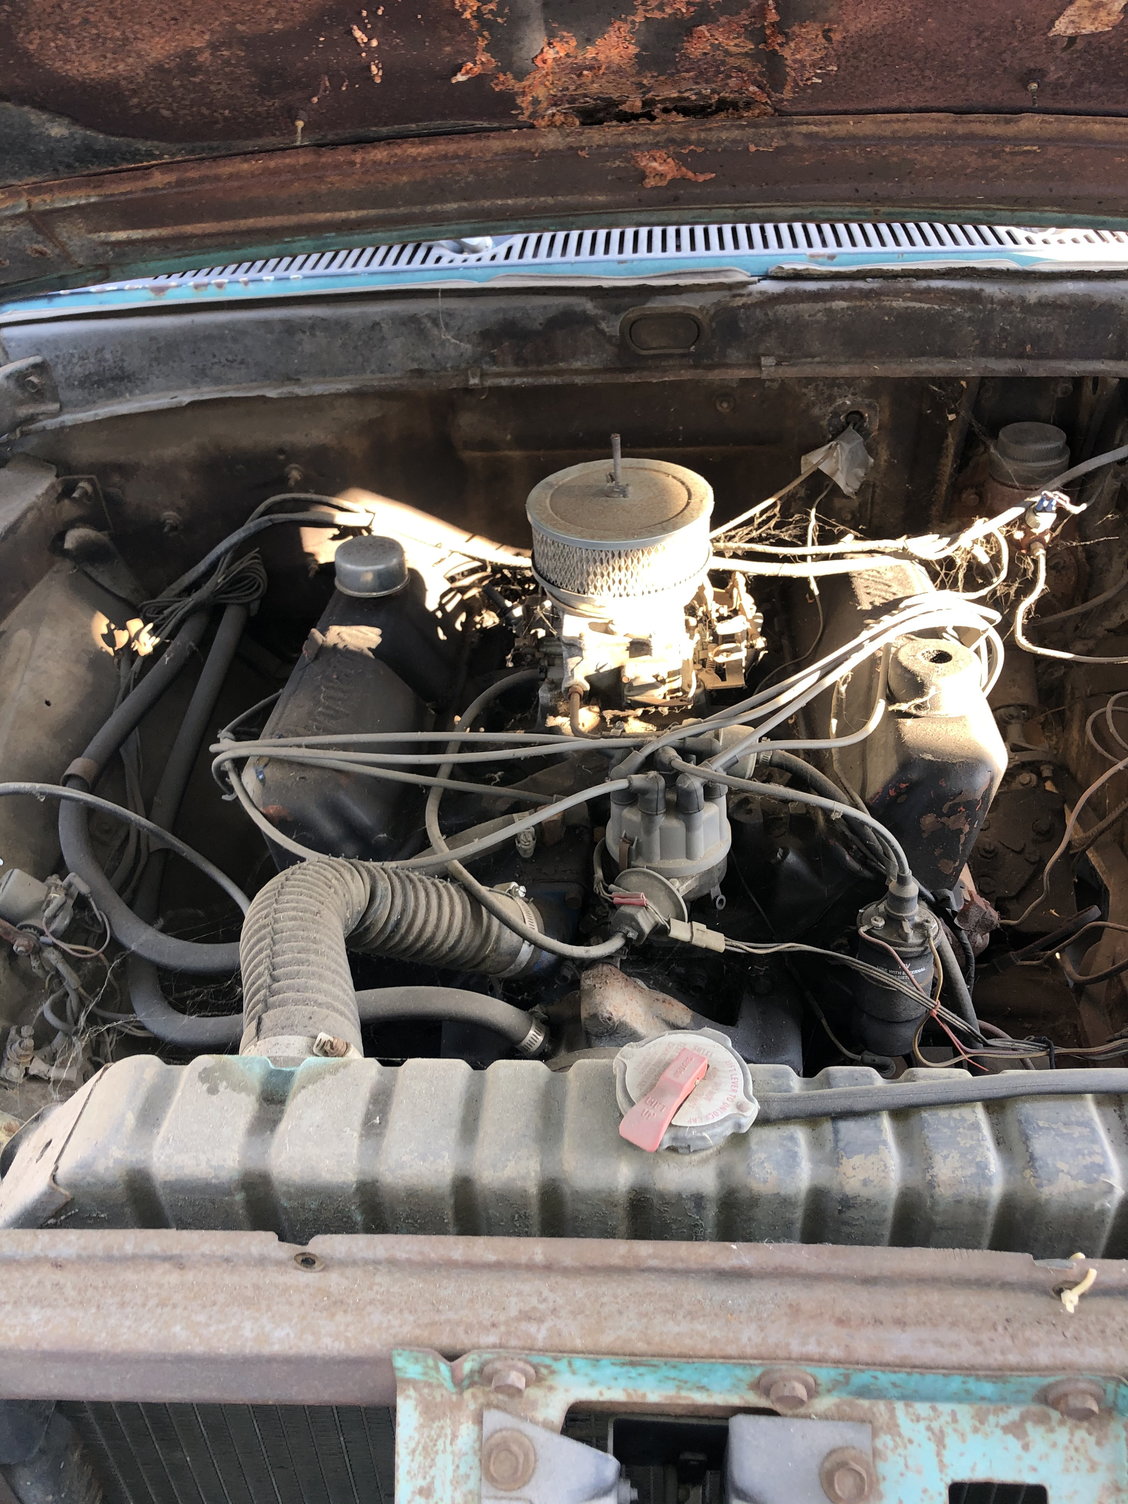 How to Identify 1966 F100 Engine - Ford Truck Enthusiasts Forums